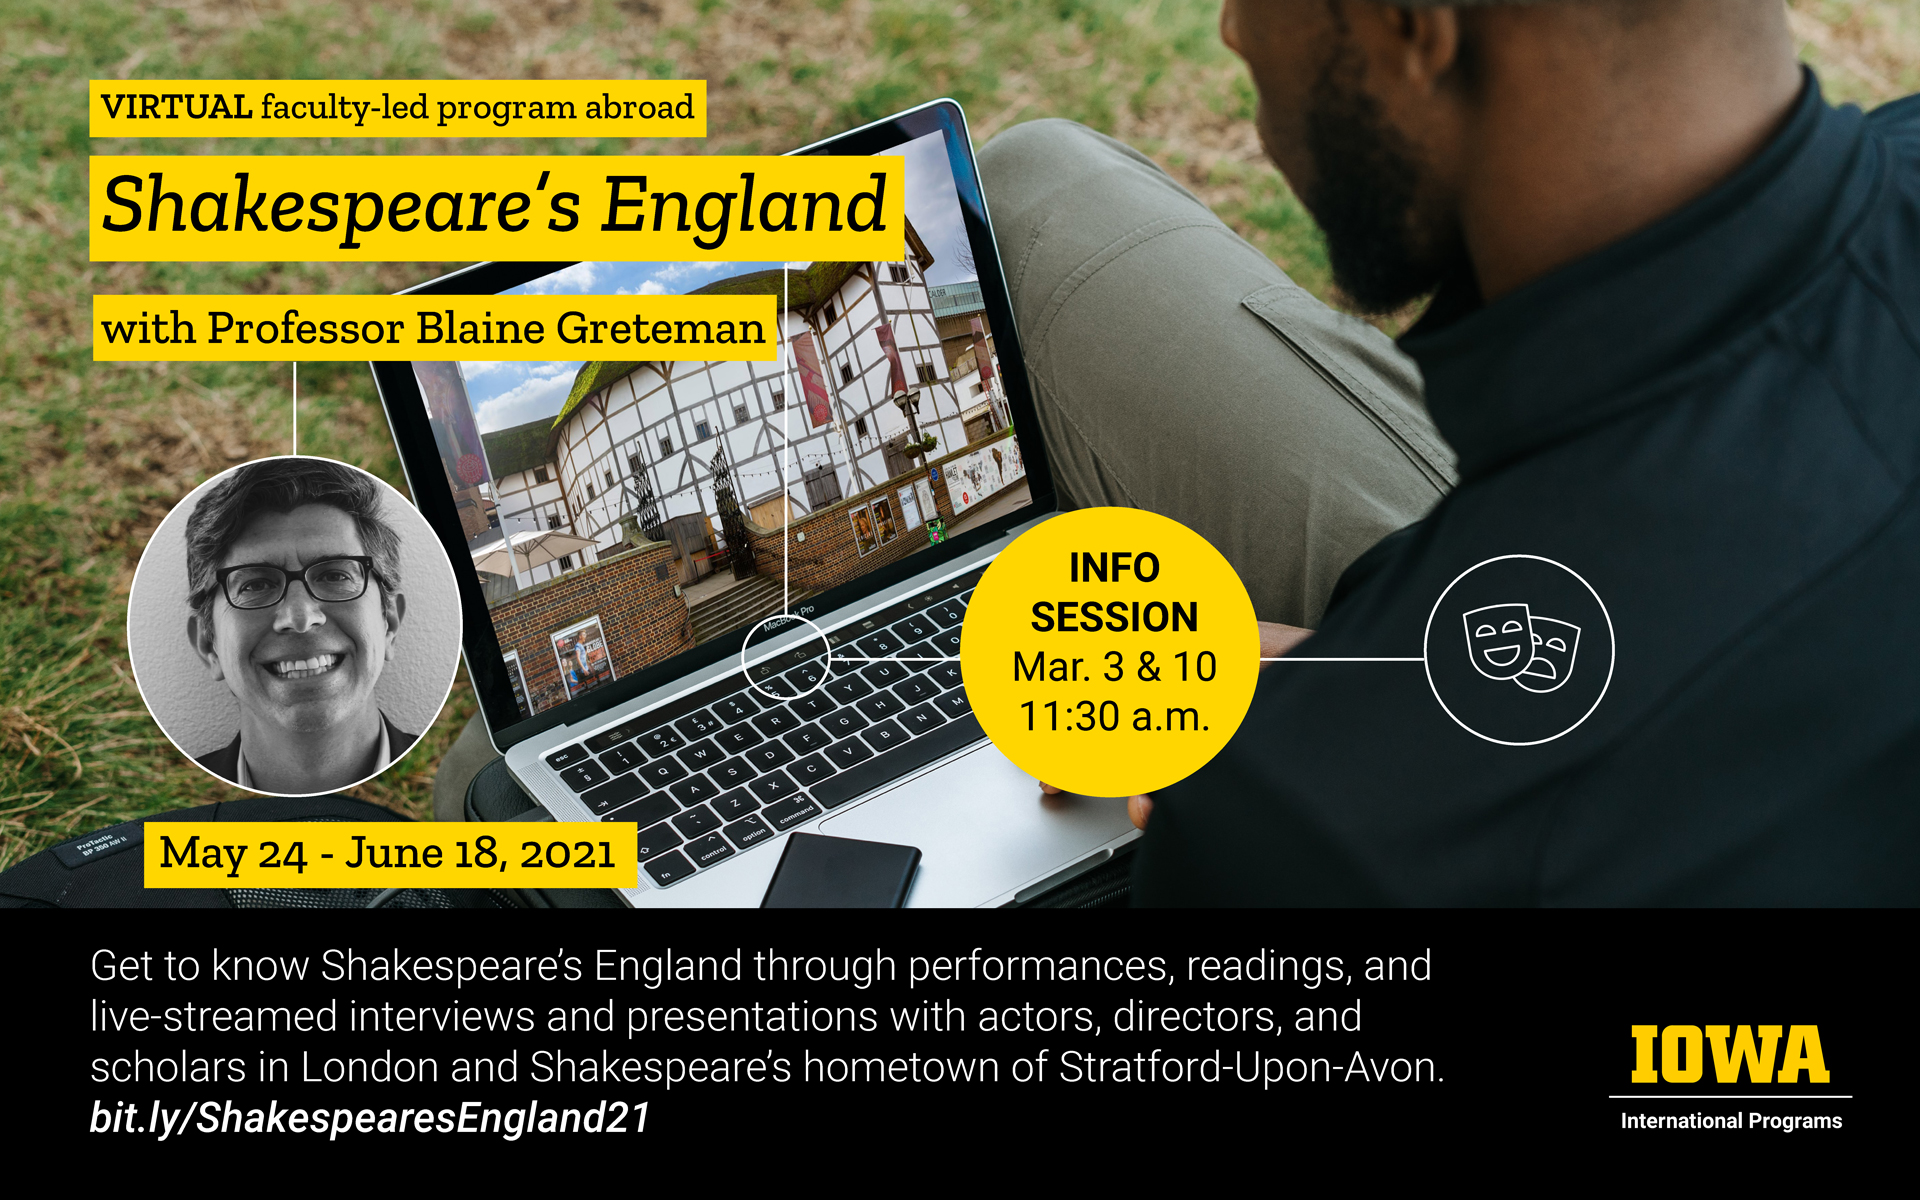 Virtual faculty-led program abroad Shakespeare's England with Professor Blaine Greteman happening May 24 through June 18, 2021. Info session March 3 and March 10, 2021 at 11:30am. Get to know Shakespeare's England through performances, readings, and live-streaming interviews and presentations with actors, directors, and scholars in London and Shakespeare's hometown of Stratford-Upon-Avon. bit.ly/ShakespearesEngland